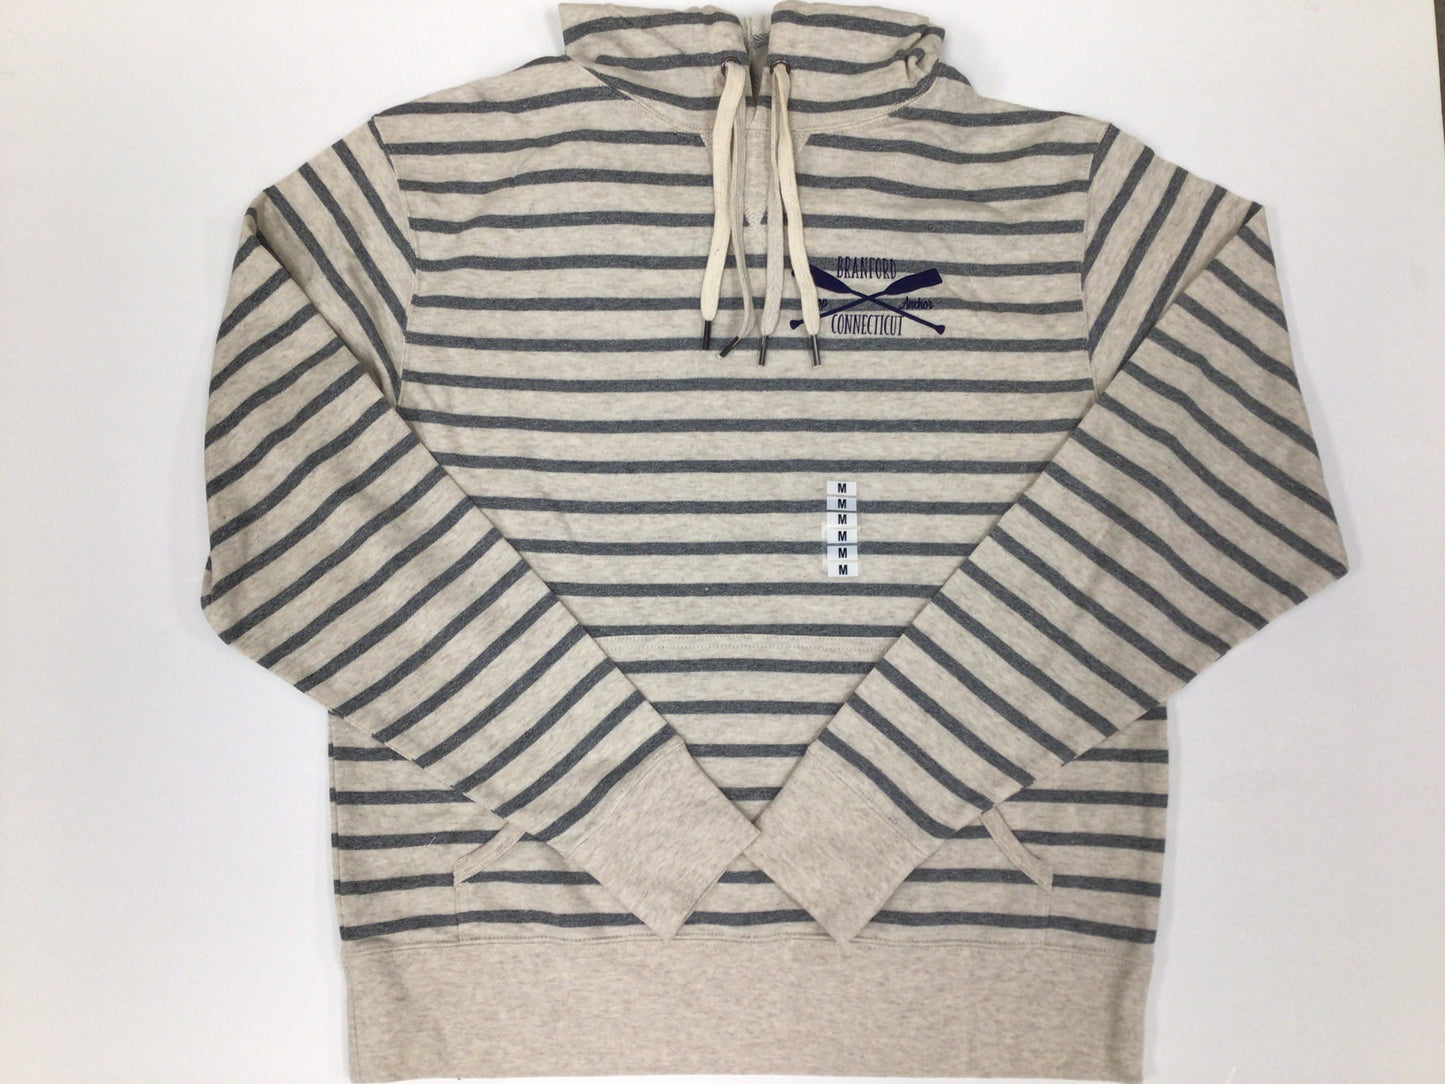 Branford, Connecticut Nantucket striped hoodie with a front pocket. Made of 70% Cotton and 30% Polyester. Machine wash, tumple dry low. Unisex adult sizing.